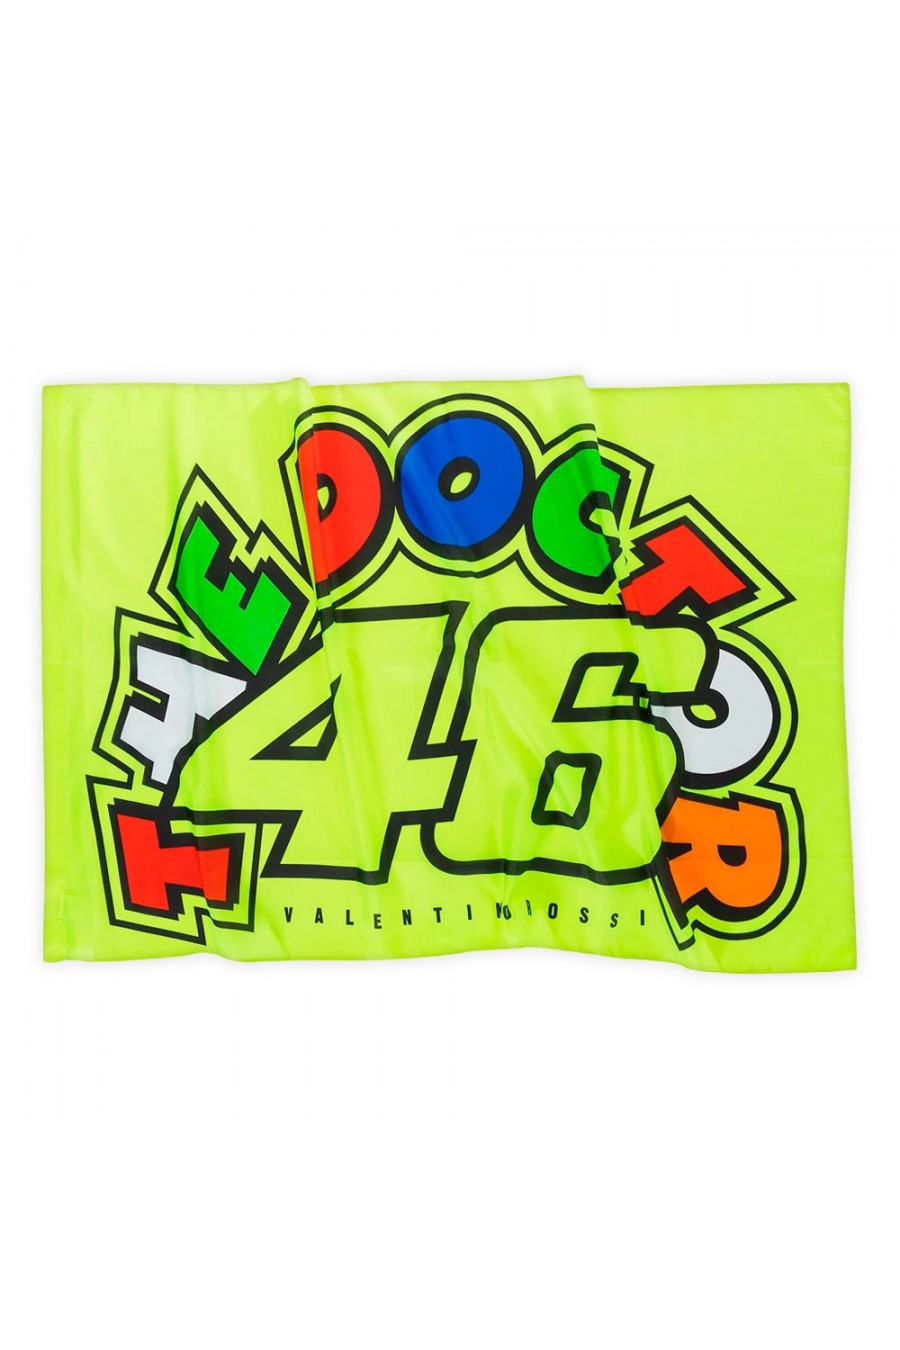 Buy Valentino Rossi 46 The Doctor Flag. Available in yellow, unisex